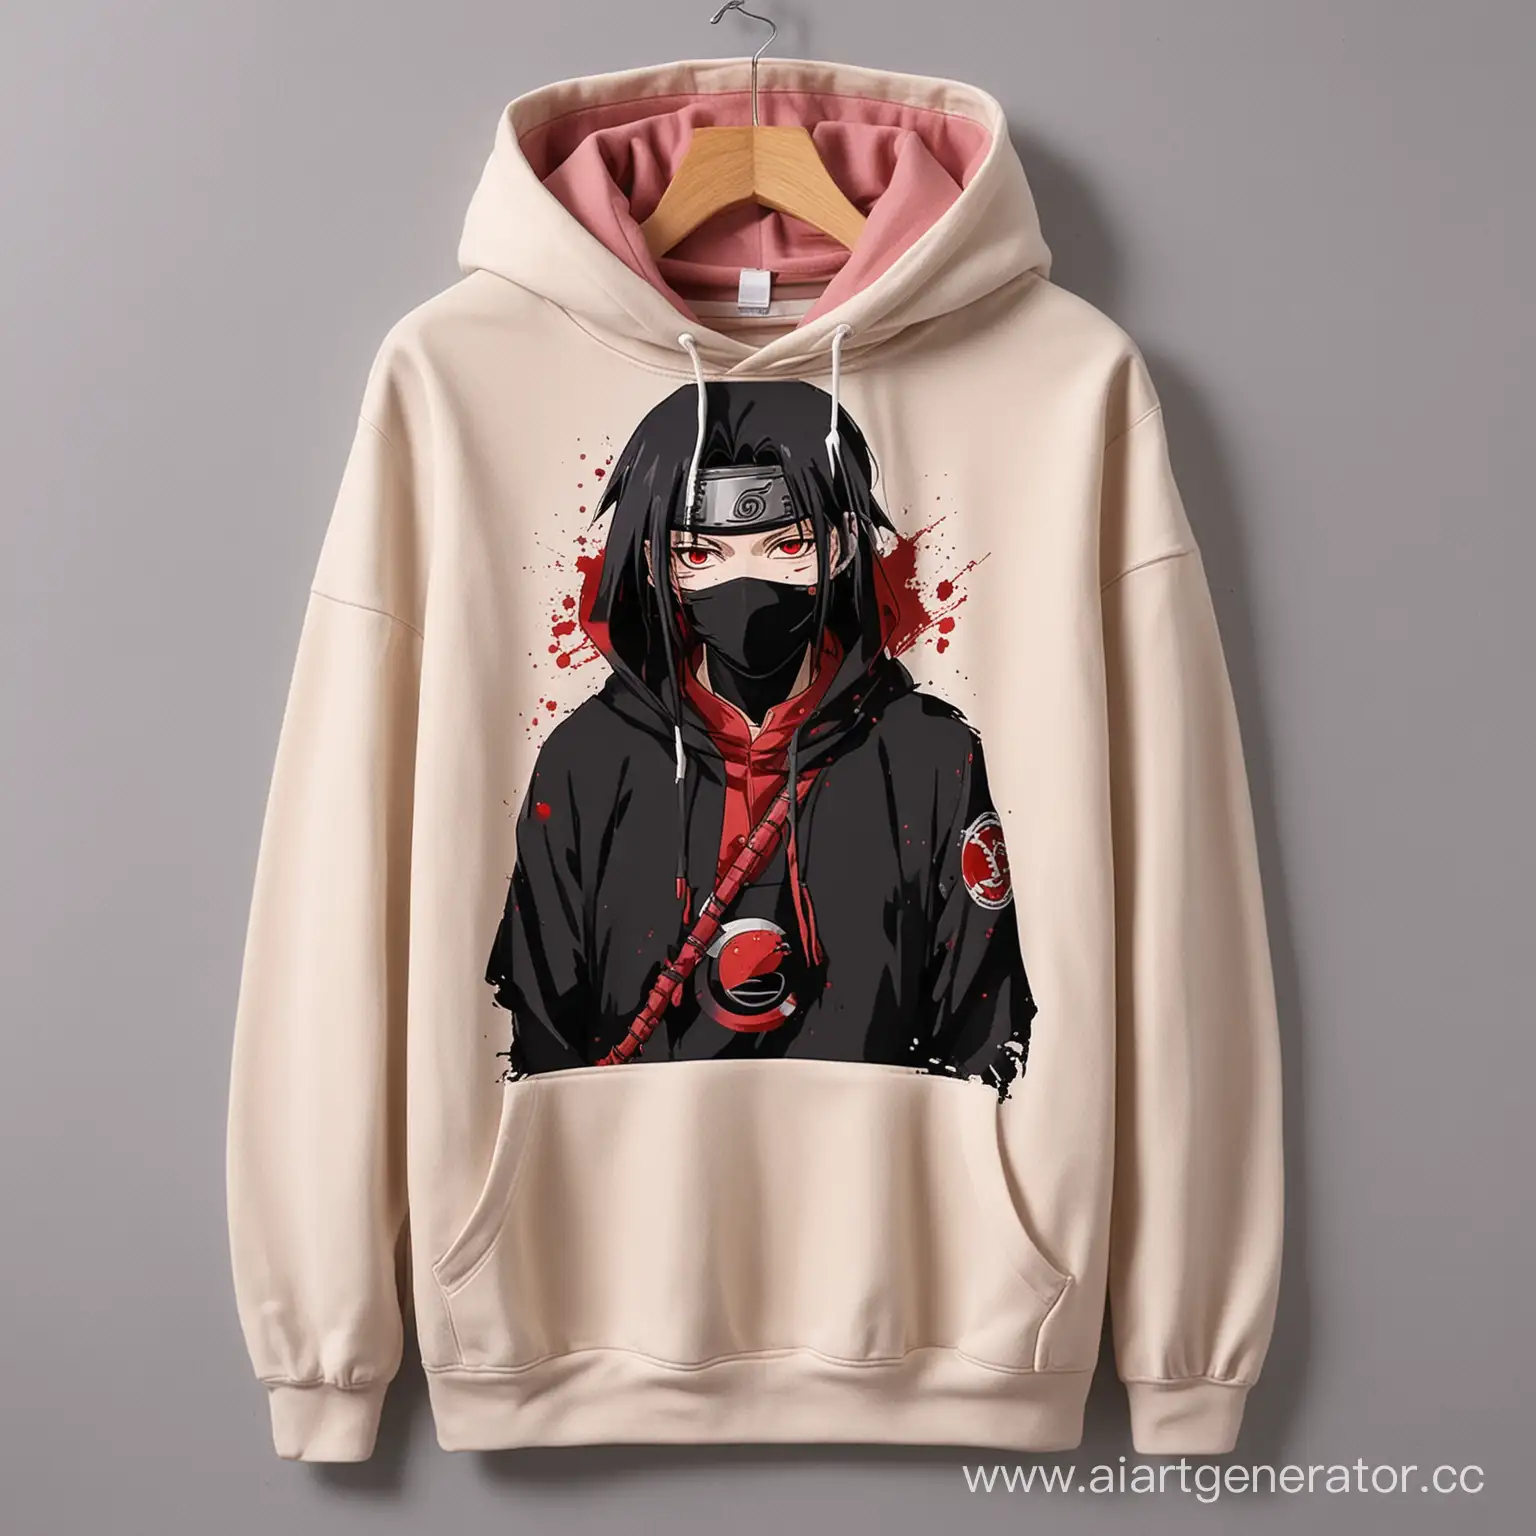 Anime-Hoodie-with-Itachi-Uchiha-Print-Stylish-and-Culturally-Inspired-Apparel